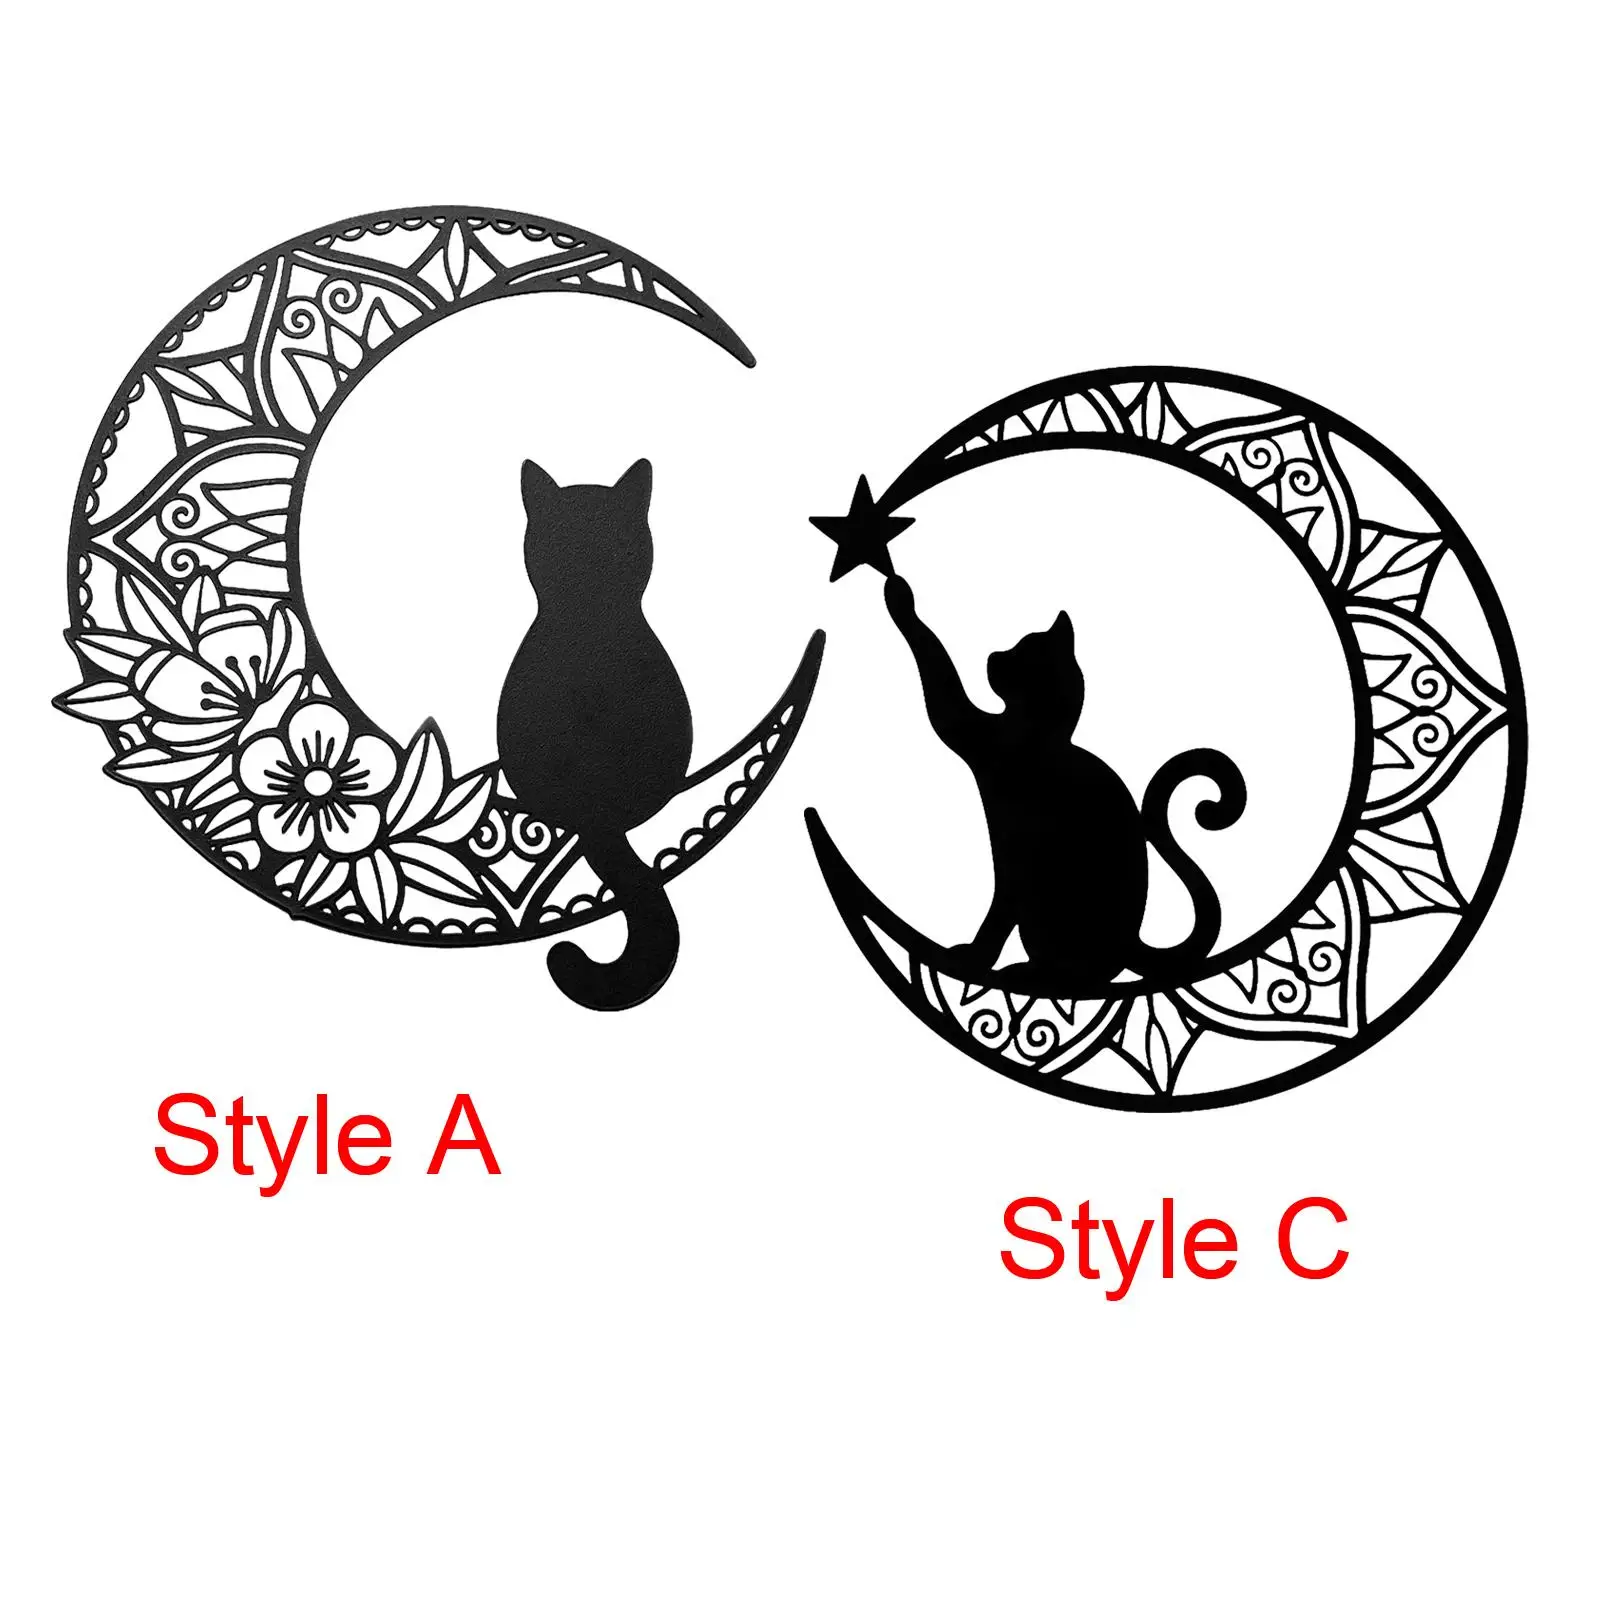 13inch Metal Wall Decor, Cat Silhouette Wall Hanging Wall Sculpture Sign for Balcony Bedroom Patio Bathroom Living Room